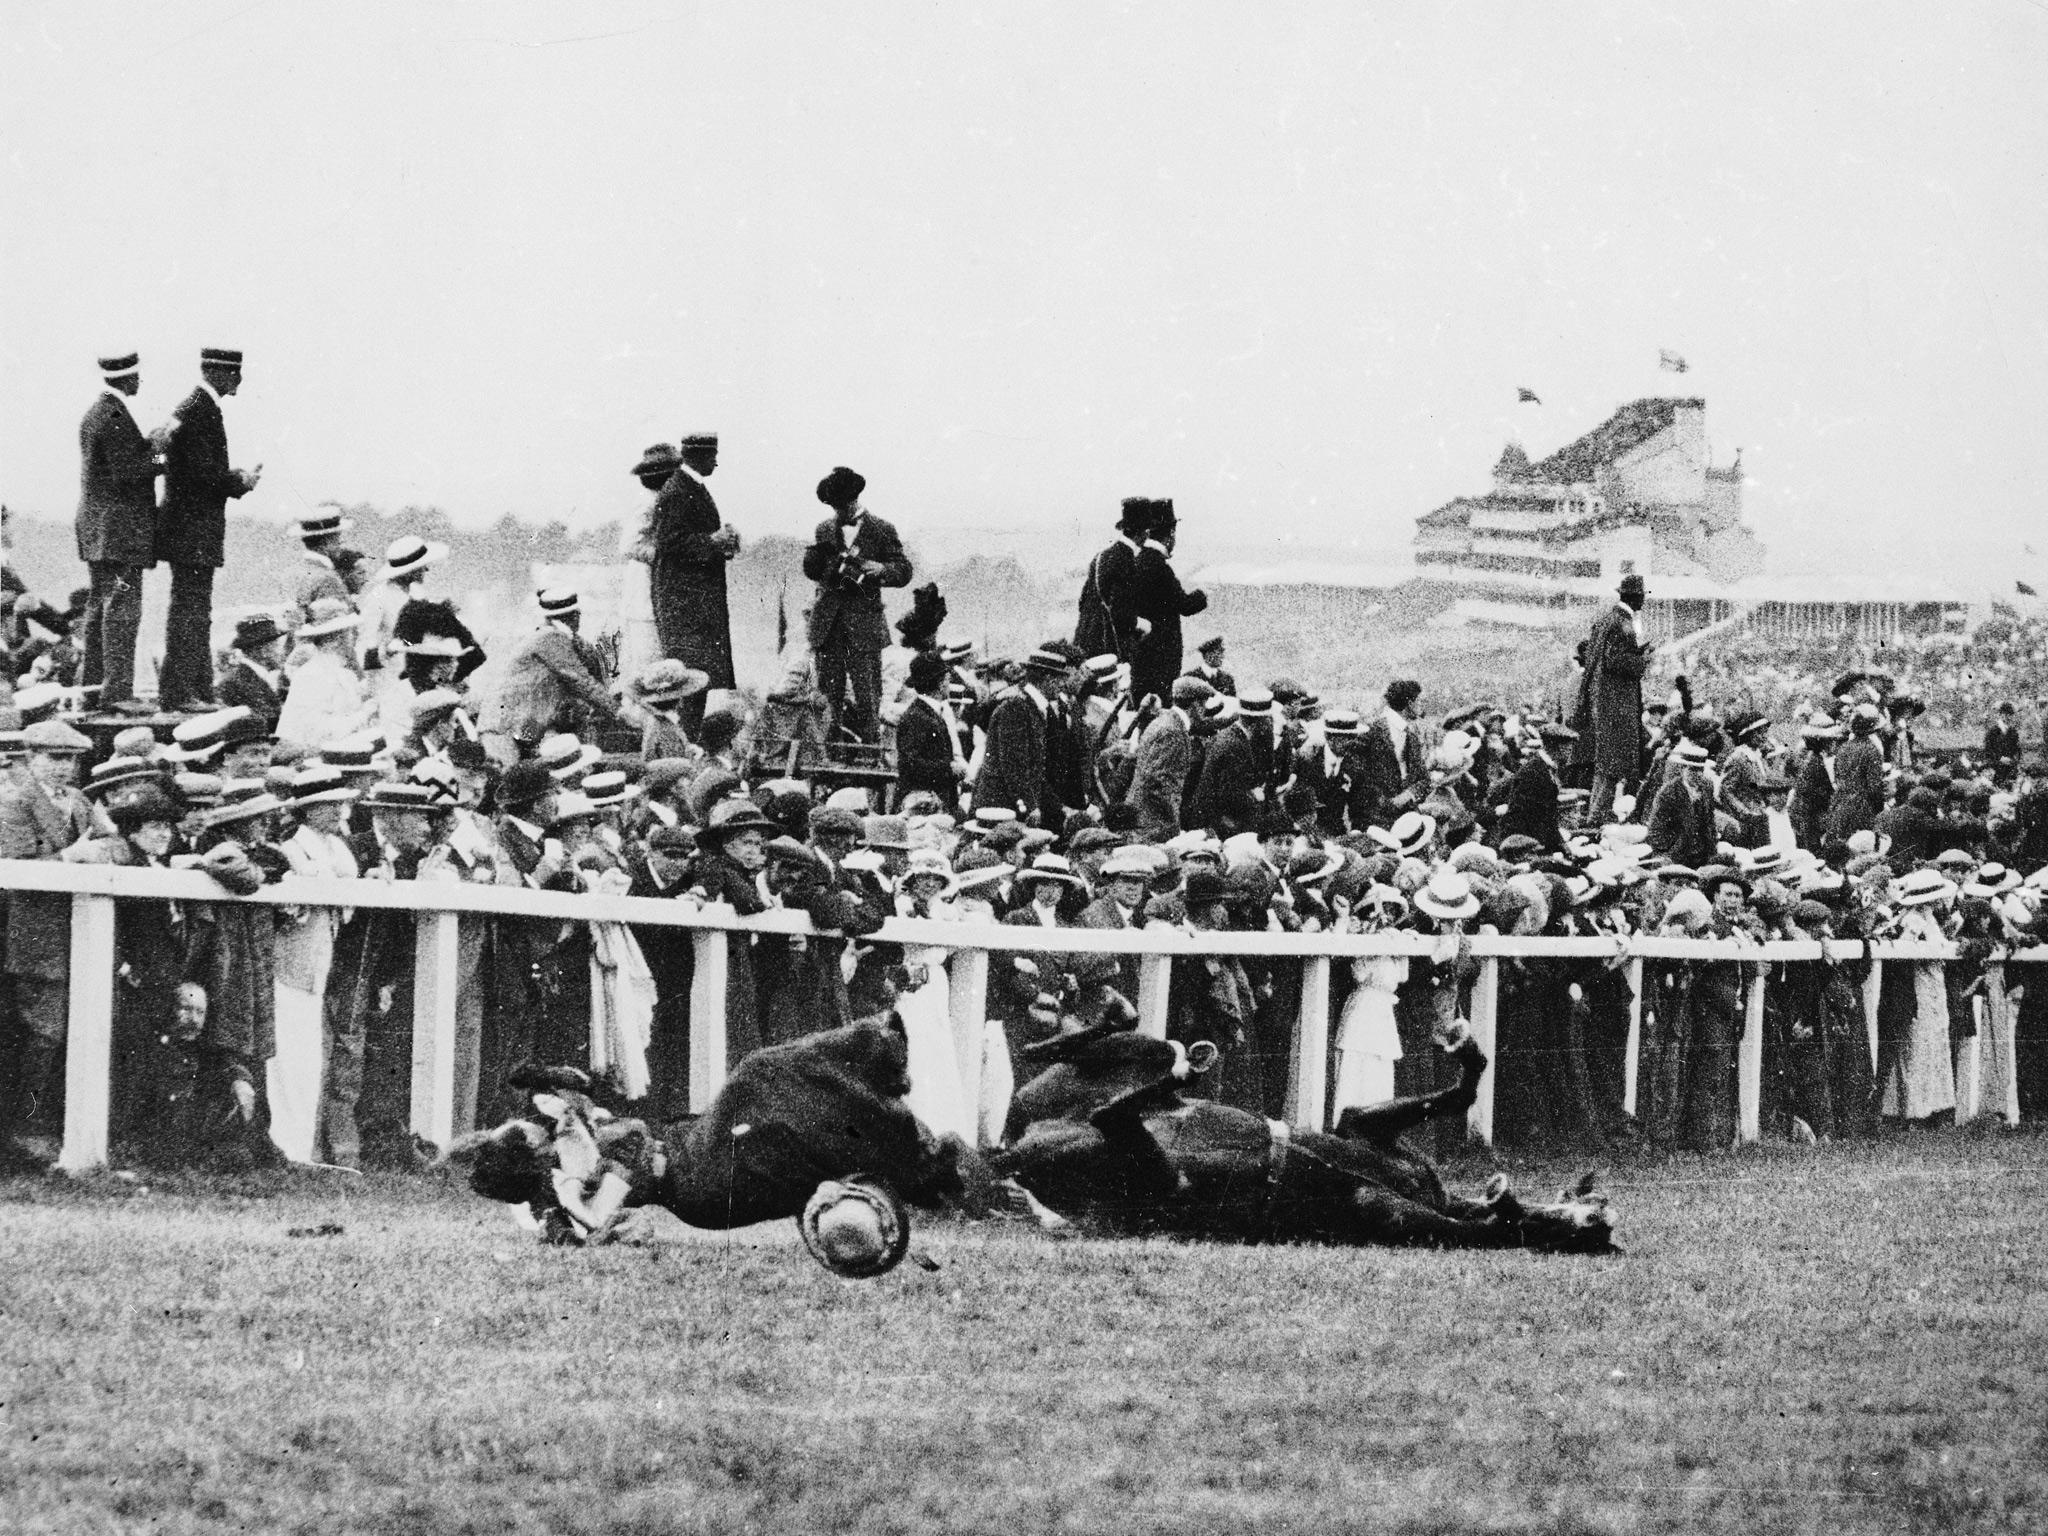 Emily Davison (1872 - 1913) is fatally injured as she tries to stop the King's horse 'Amner' on Derby Day, to draw attention to the Women's Suffragette movement